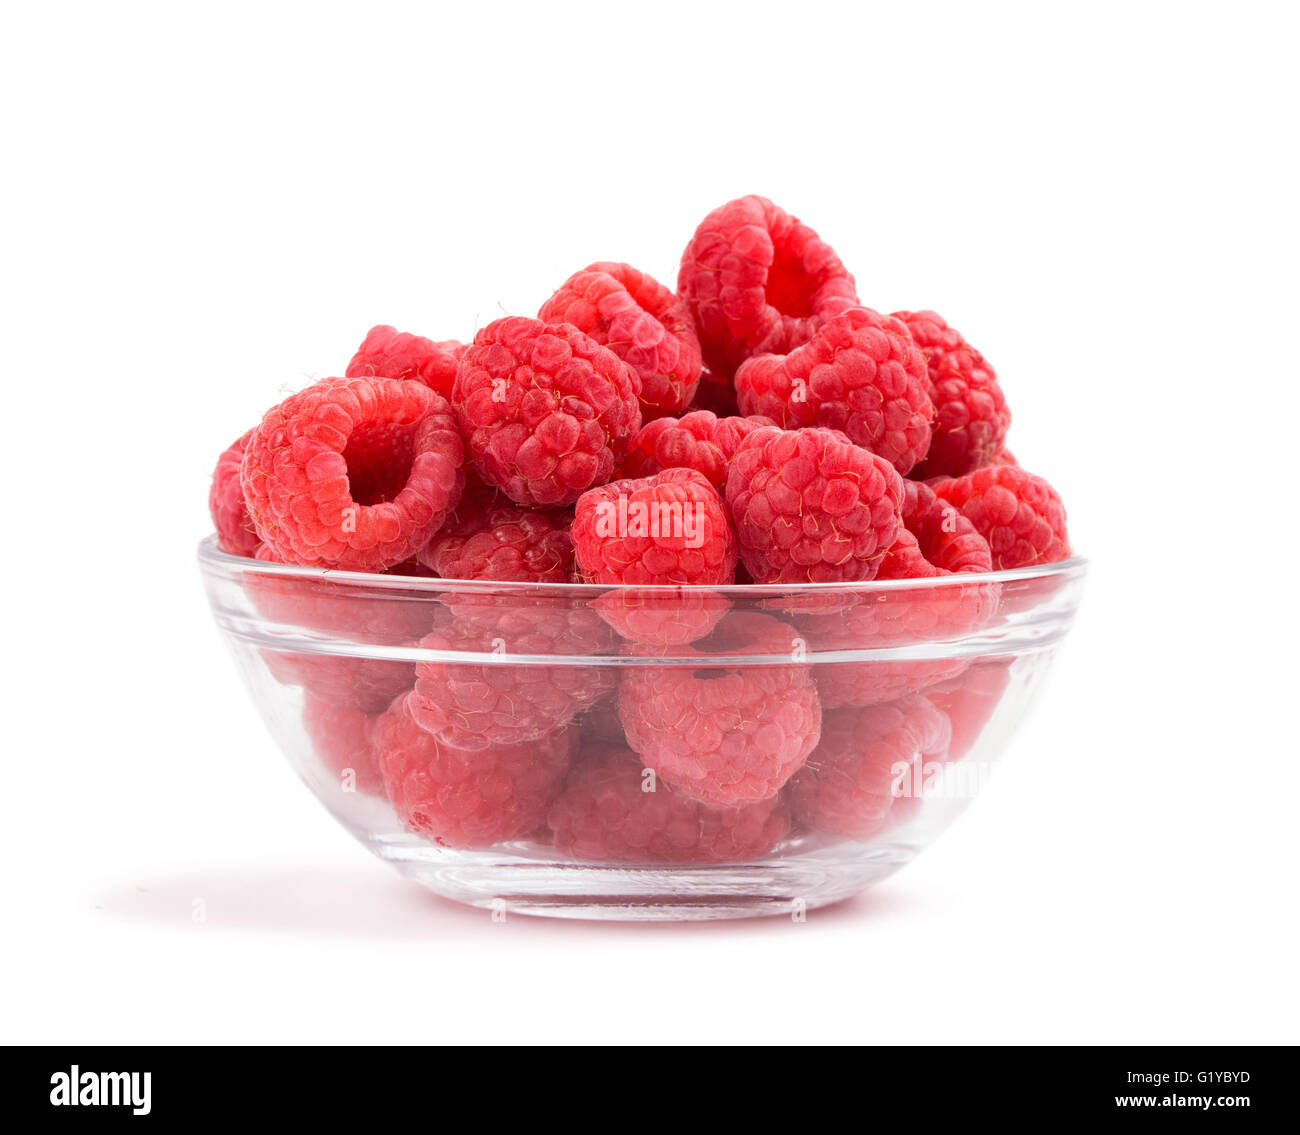 Raspberries in a glass bowl, on white Stock Photo